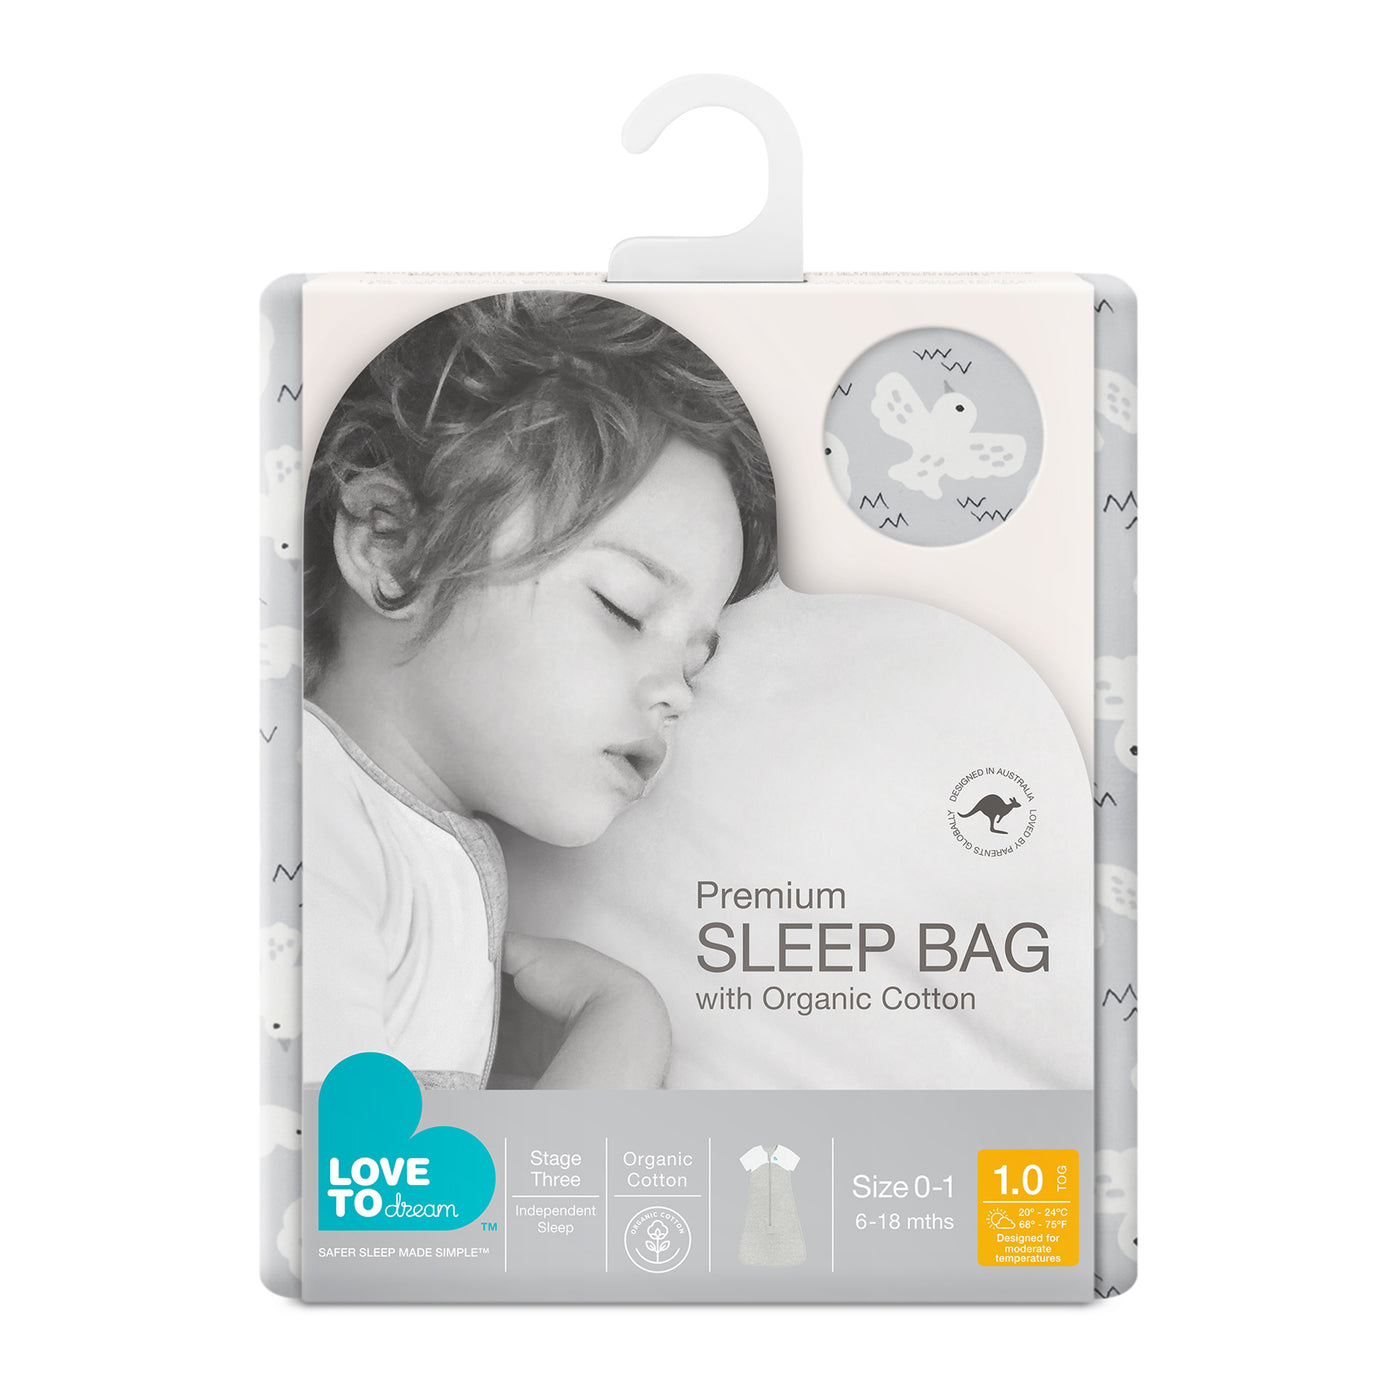 Our 1.0 TOG Organic Love to Dream Sleep Bag™ is an ultra-soft wearable blanket – designed to eliminate the need for loose blankets in the cot & ensuring a more comfortable sleep, day or night. With 1.0 TOG fabric, it is perfect for all year use in moderate temperatures.